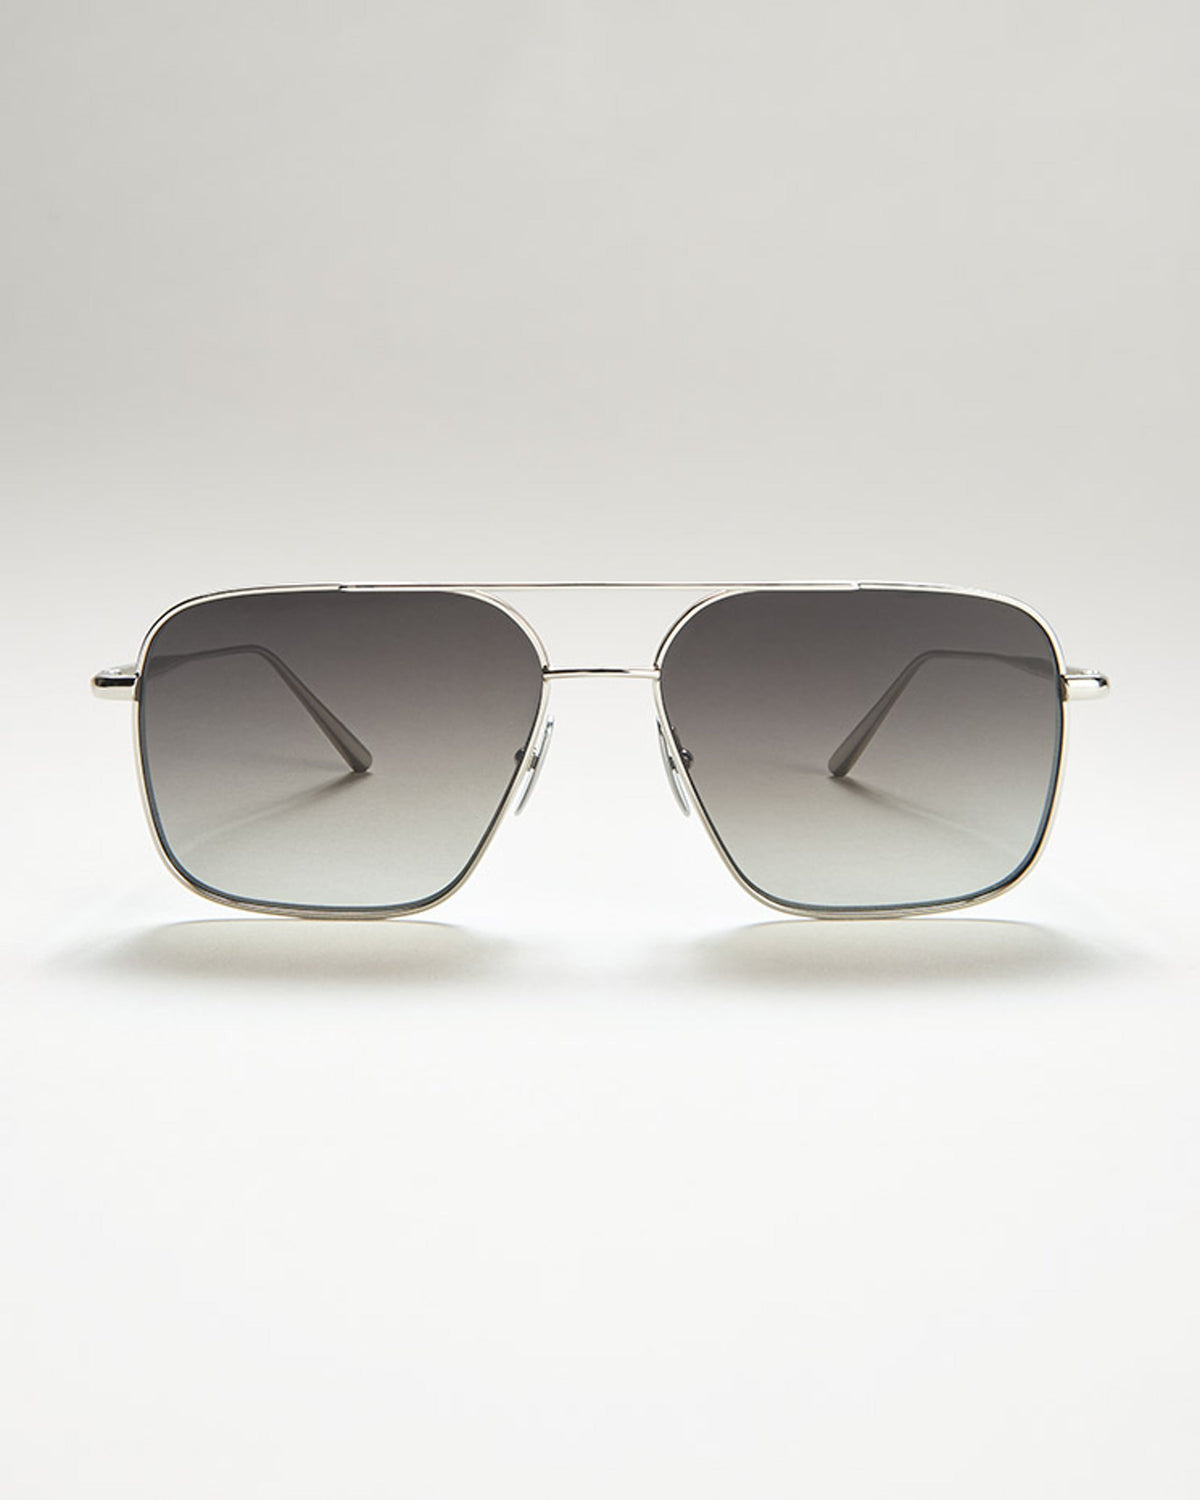 Silver coloured steel framed sunglasses with grey lenses